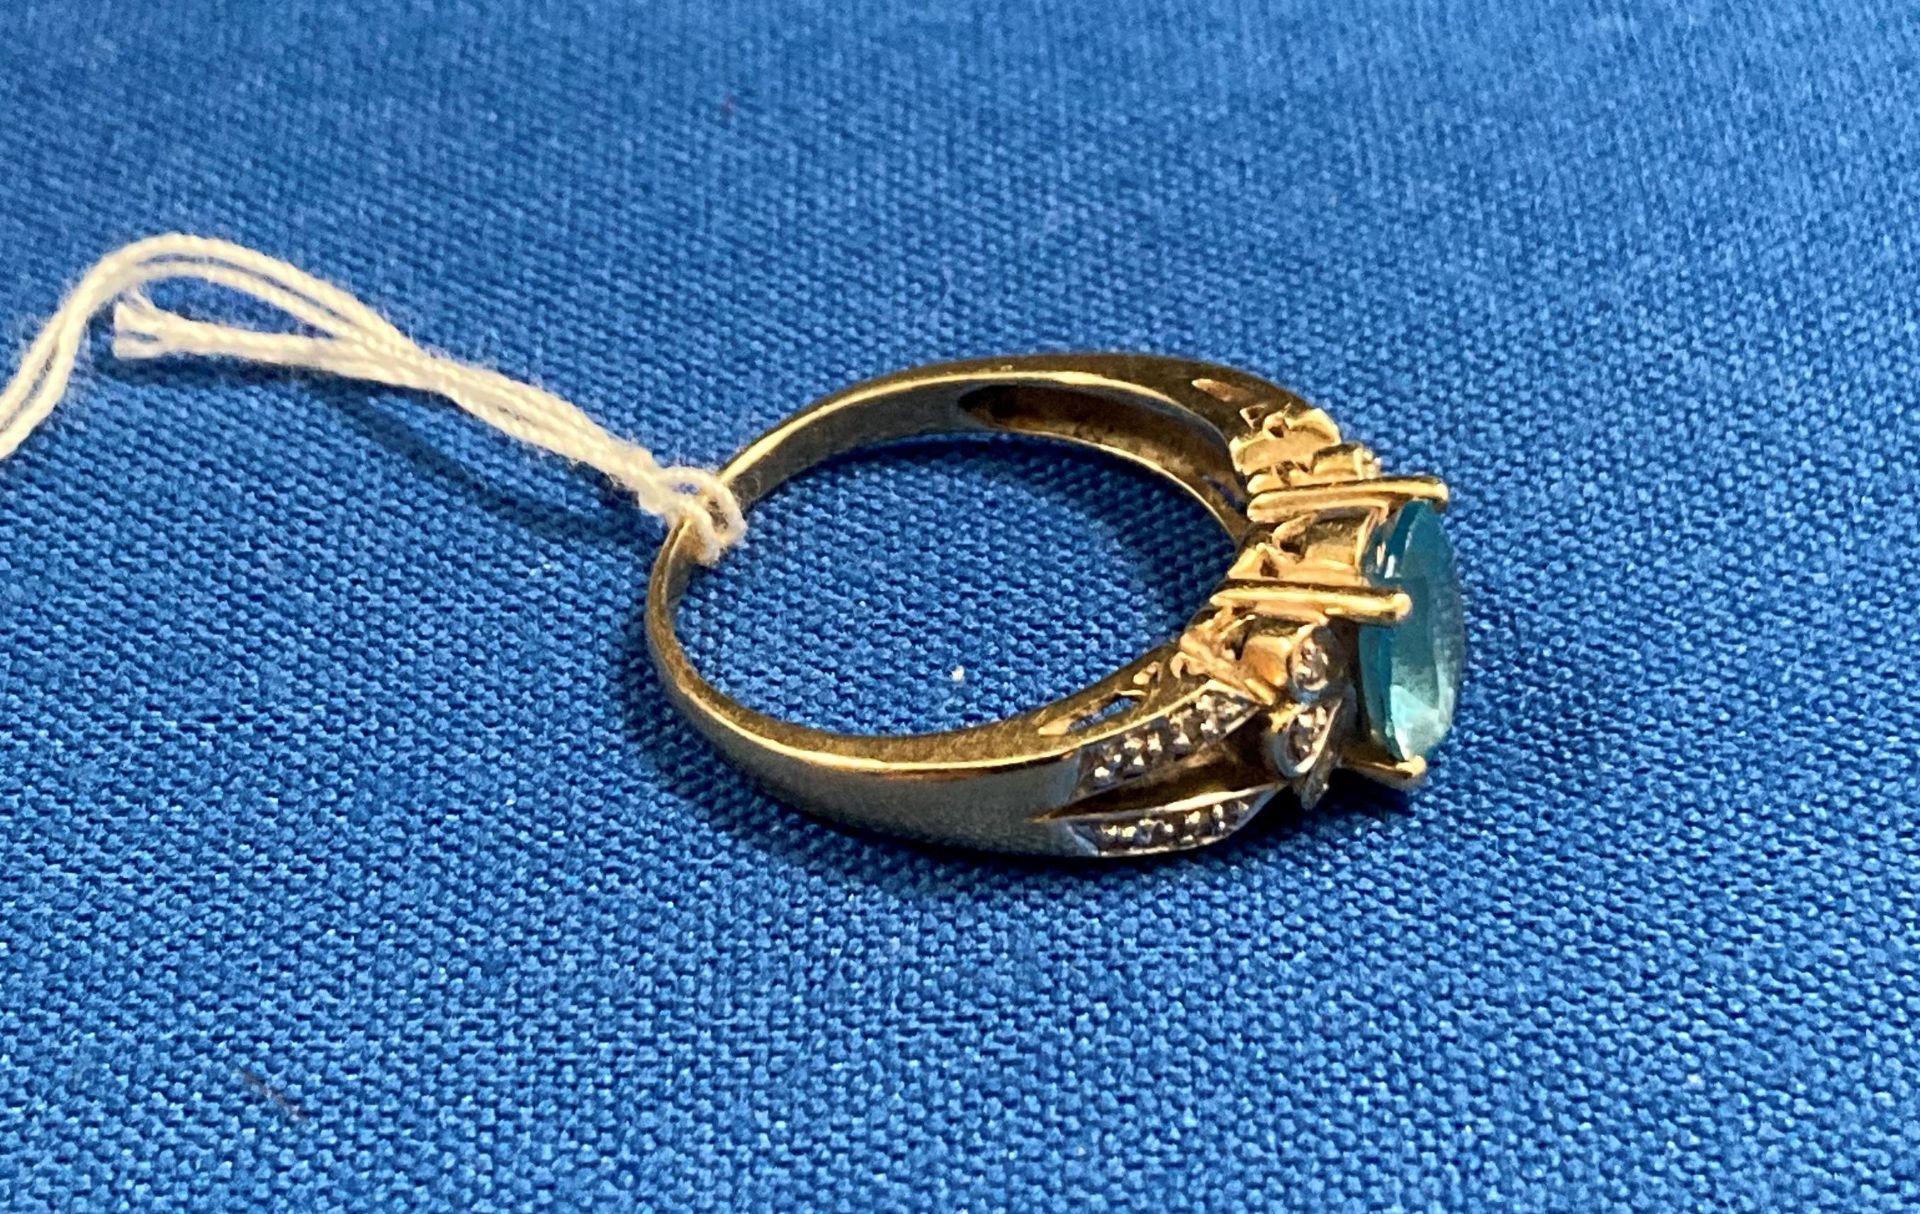 9ct gold (375) with small diamonds and central oval light-blue stone (possibly aquamarine) size Q. - Image 2 of 2